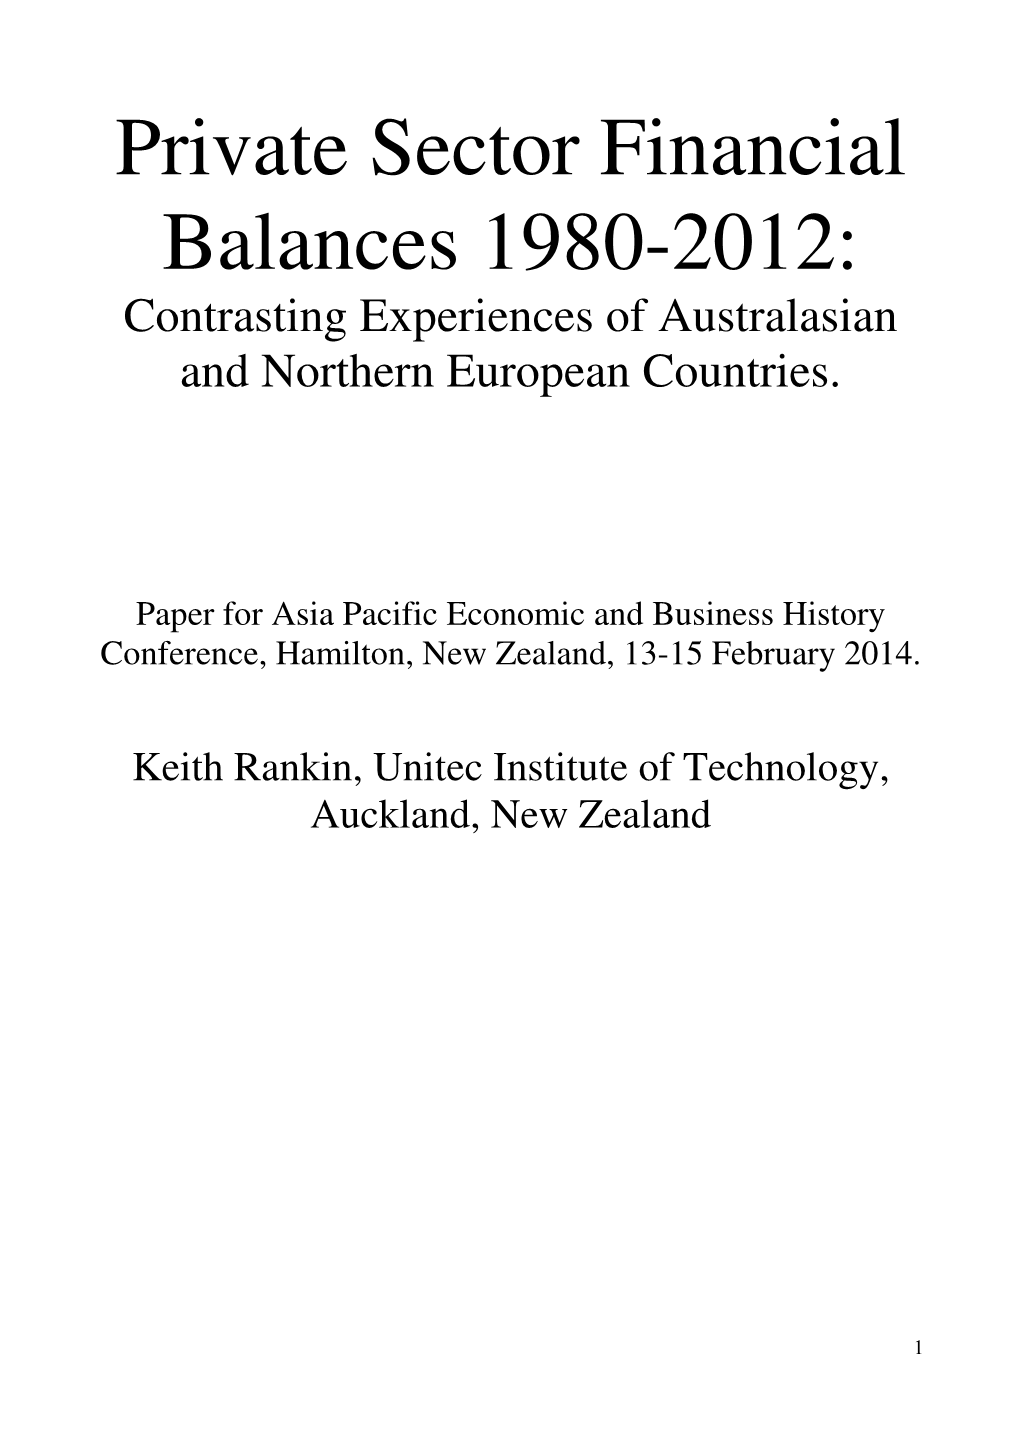 Private Sector Financial Balances 1980-2012: Contrasting Experiences of Australasian and Northern European Countries